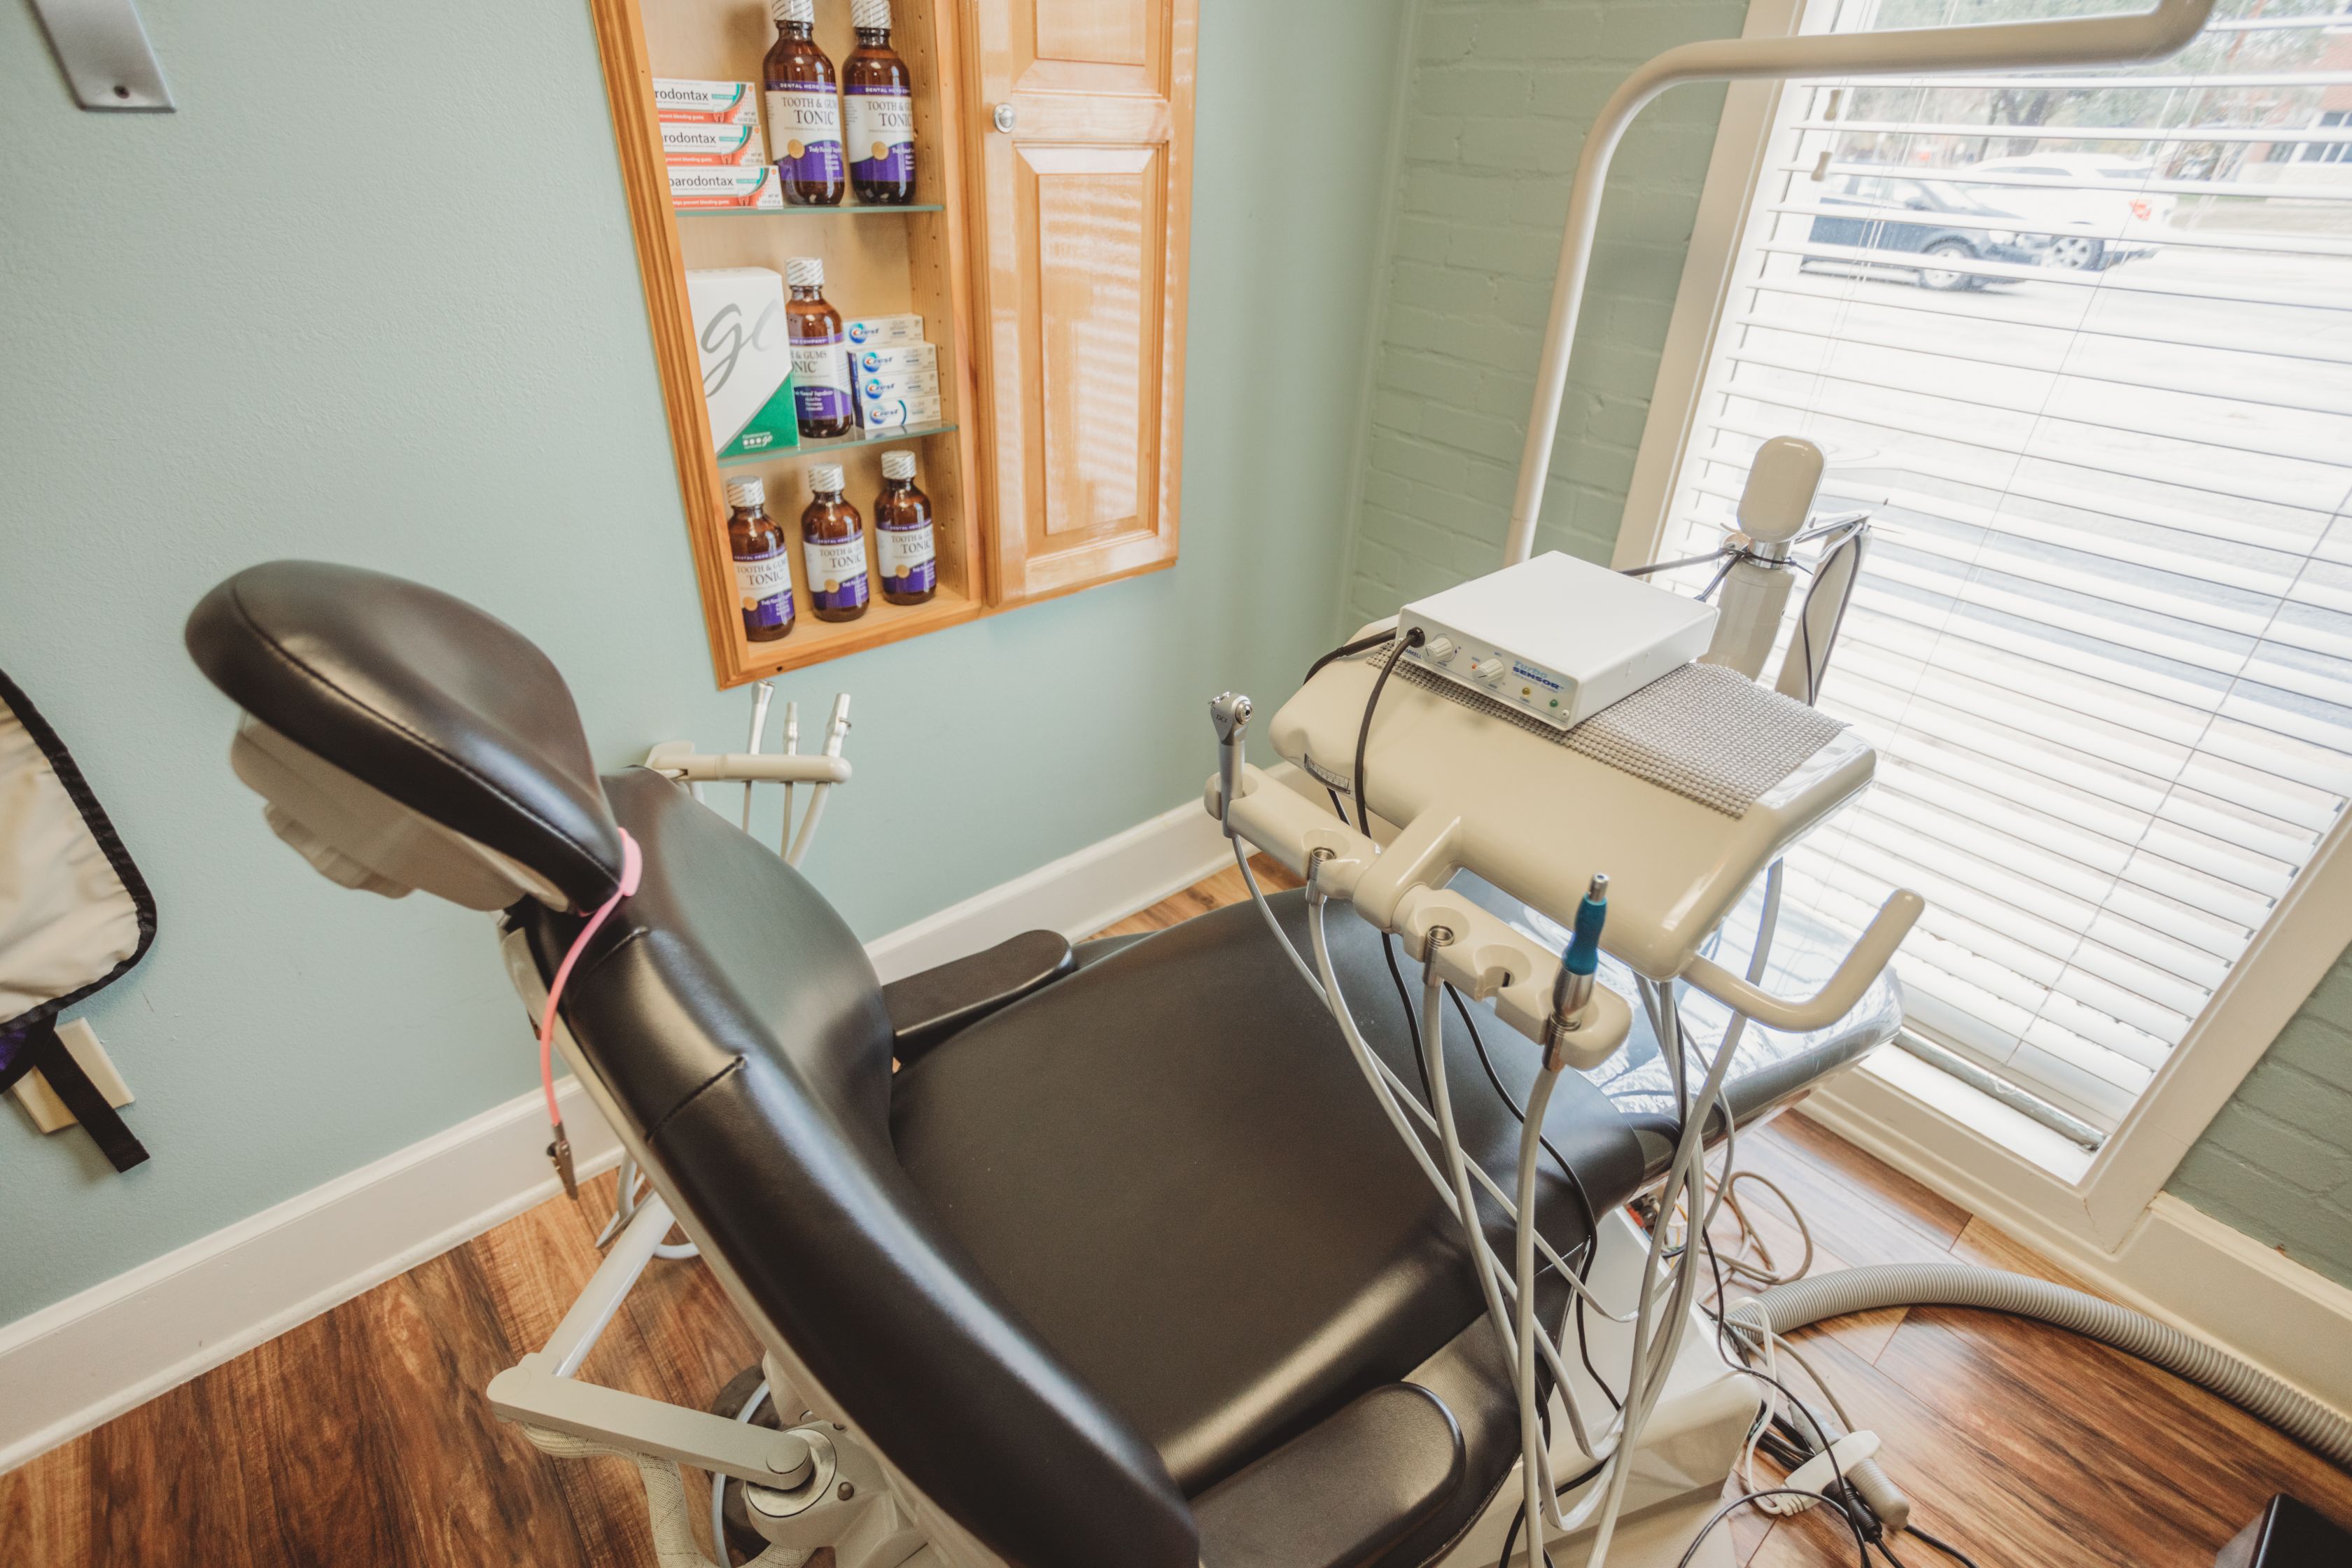 How Does The Dentist Office In West Houston Handle Payment Options And Insurance Claims?